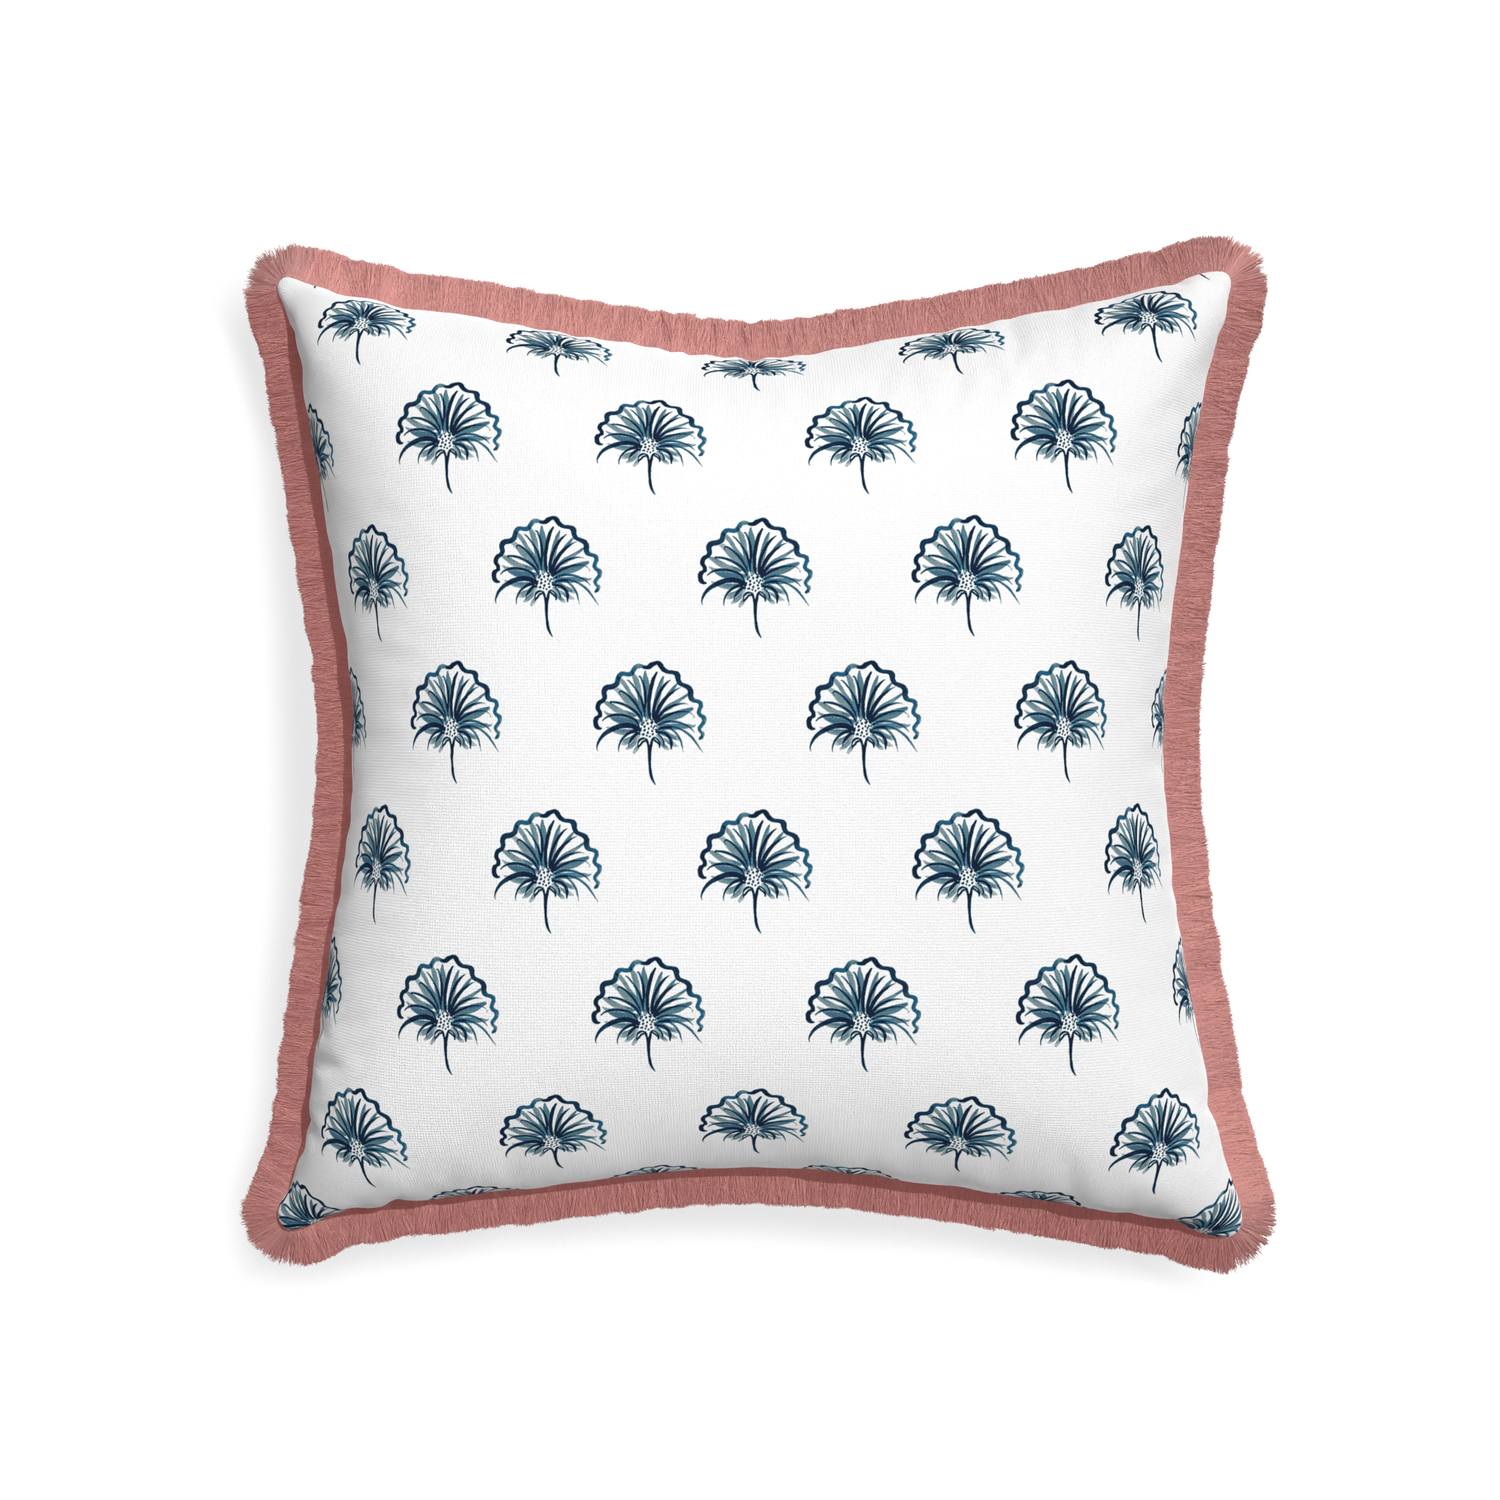 22-square penelope midnight custom floral navypillow with d fringe on white background